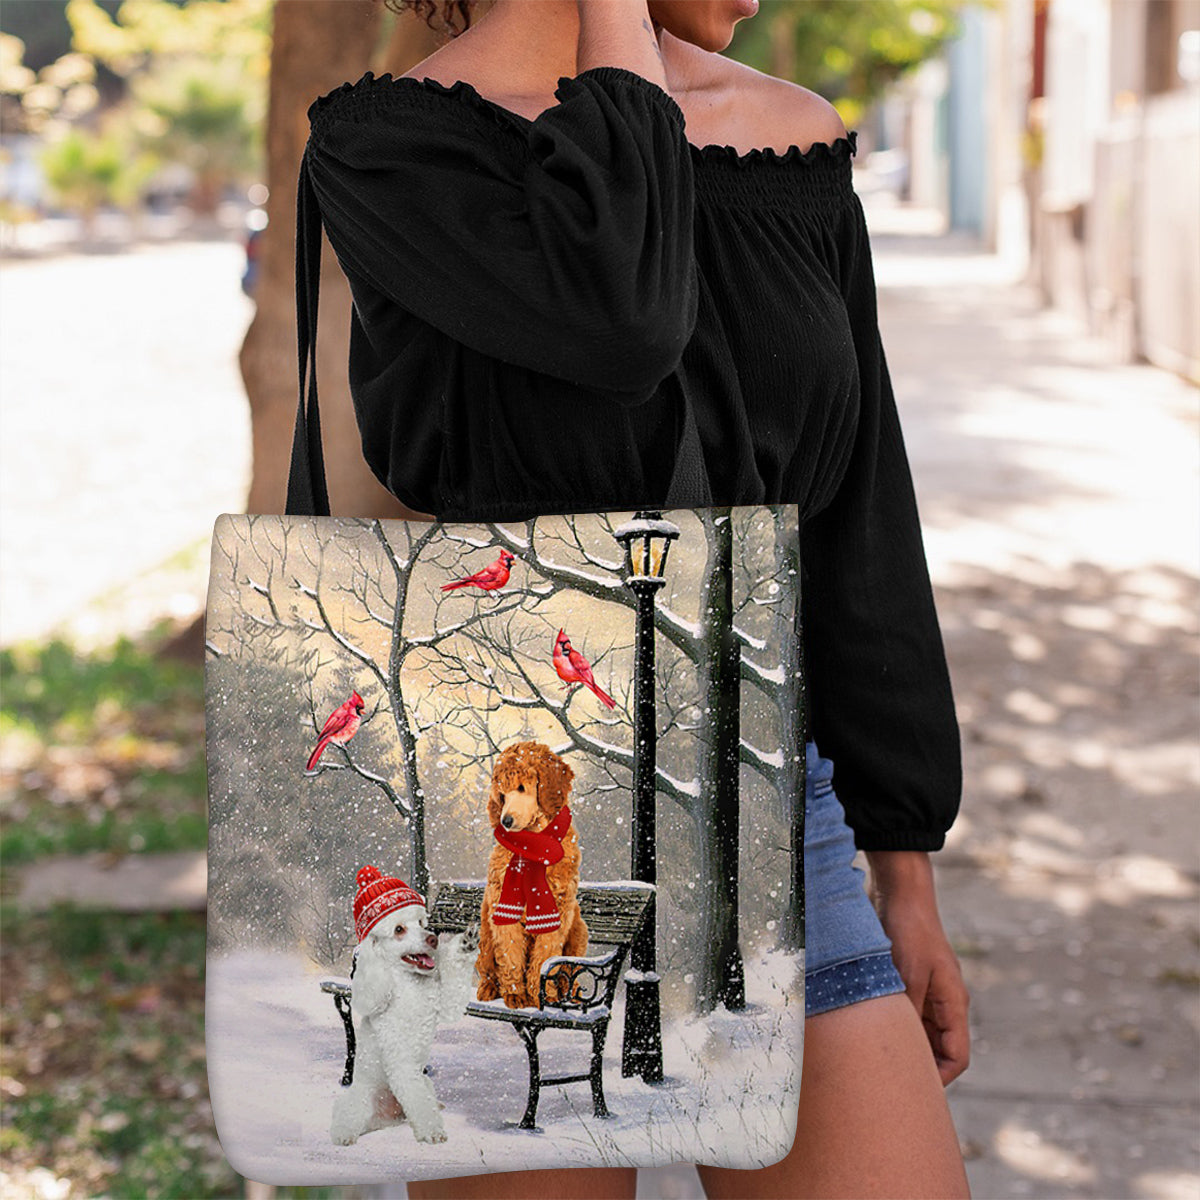 Poodle Hello Christmas/Winter/New Year Tote Bag